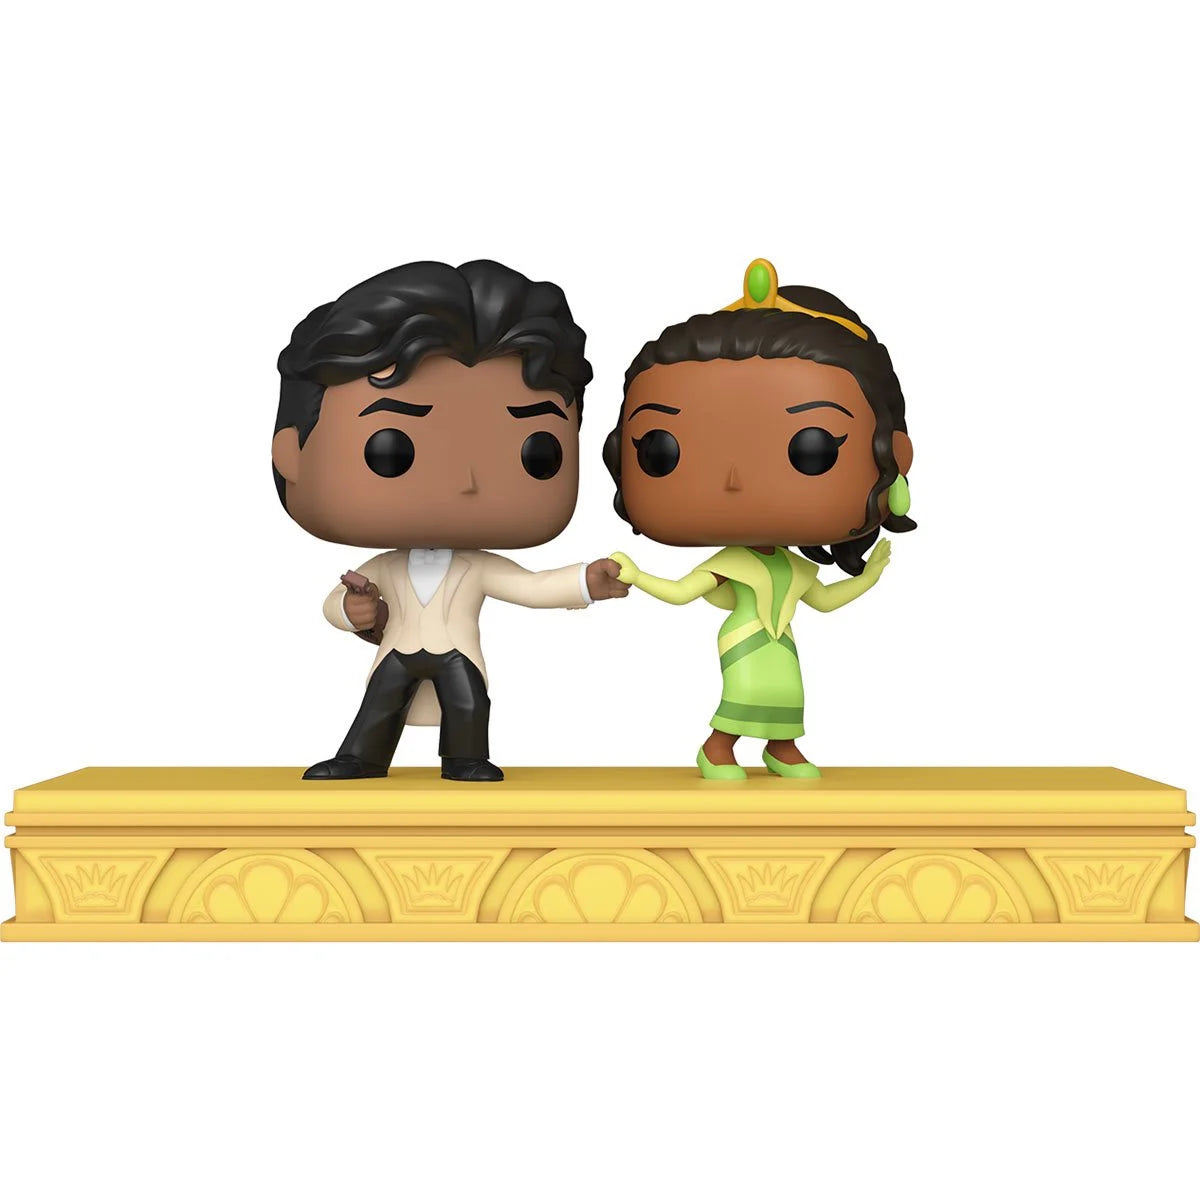 PRESALE | Funko POP! Moments: Disney: 100th Anniversary - Princess and the Frog: Tiana and Naveen #1322 Vinyl Figures